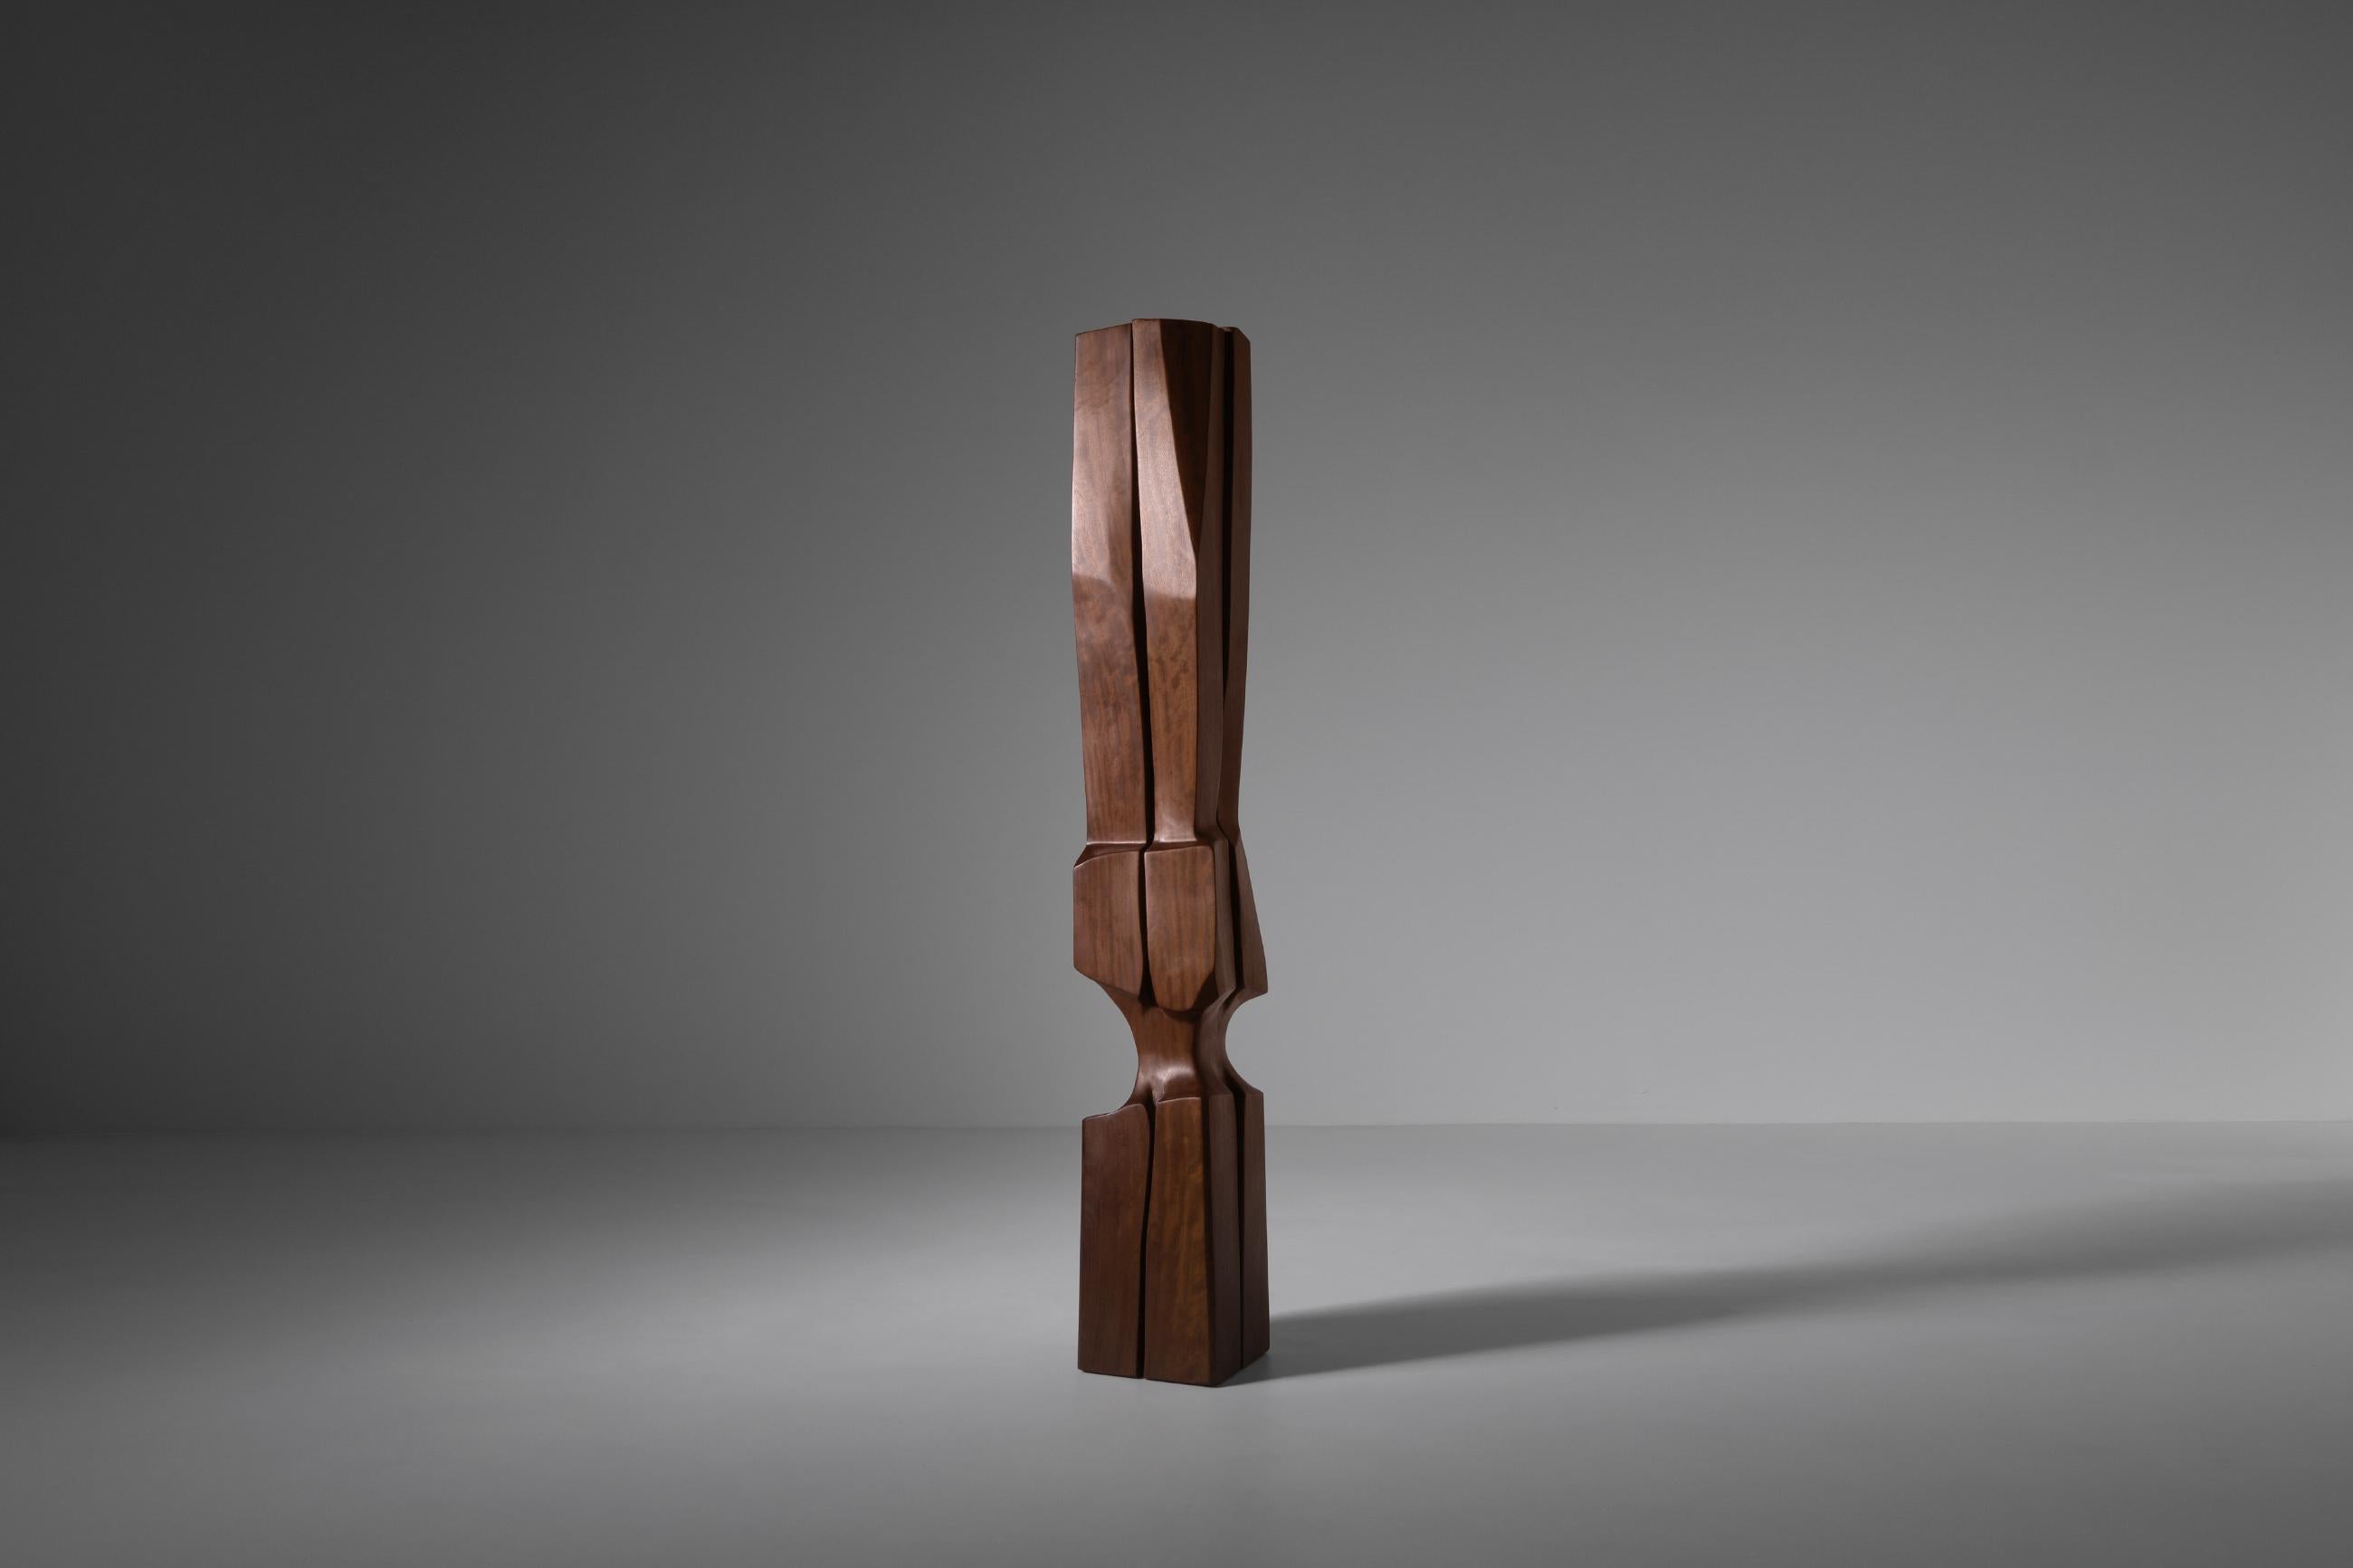 XL abstract wooden sculpture, the Netherlands 1981. Beautiful hand-carved organic shape out of one piece of solid Iroko wood which strengthen its 'native' chracter. Signed at the bottom. The sculpture is in an excellent original condition.